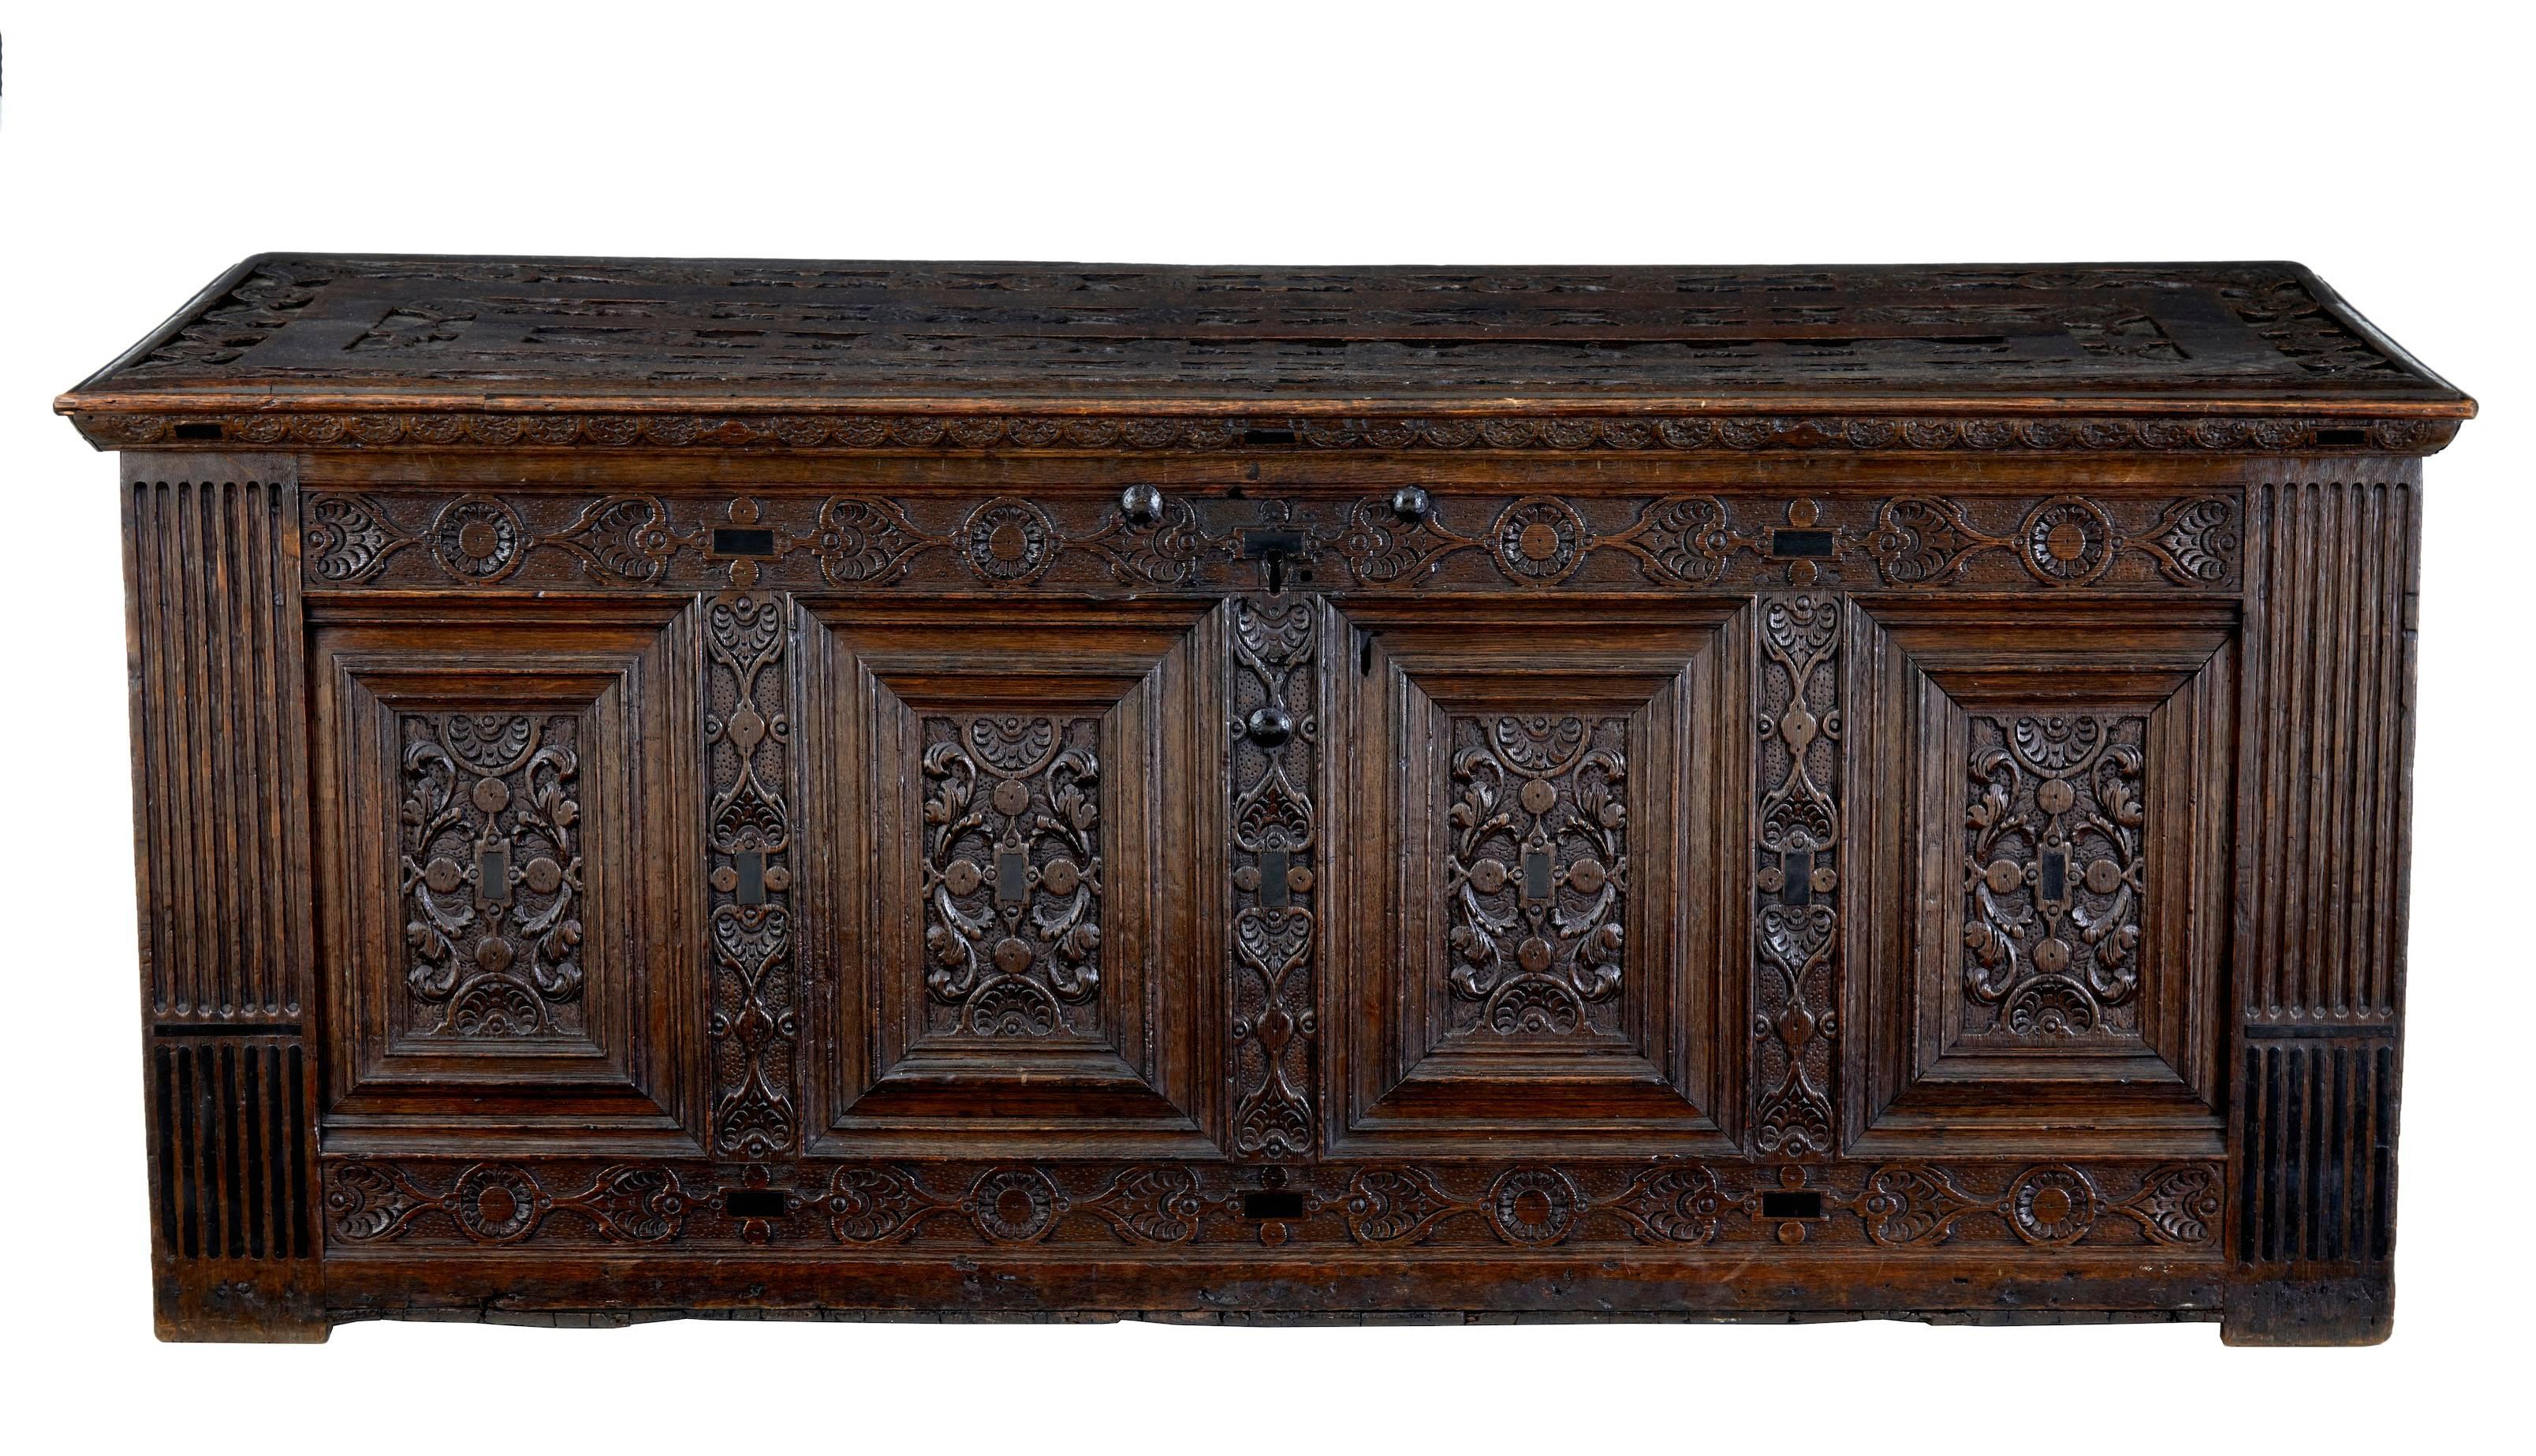 Fine quality Flemish oak coffer, circa 1680.

Beautifully carved featuring four panels to the front, surrounded by florals. Fluted corners and ebony detailing on all sides.
No lock present.
Shrinkage between the planks to the top.

Measures: